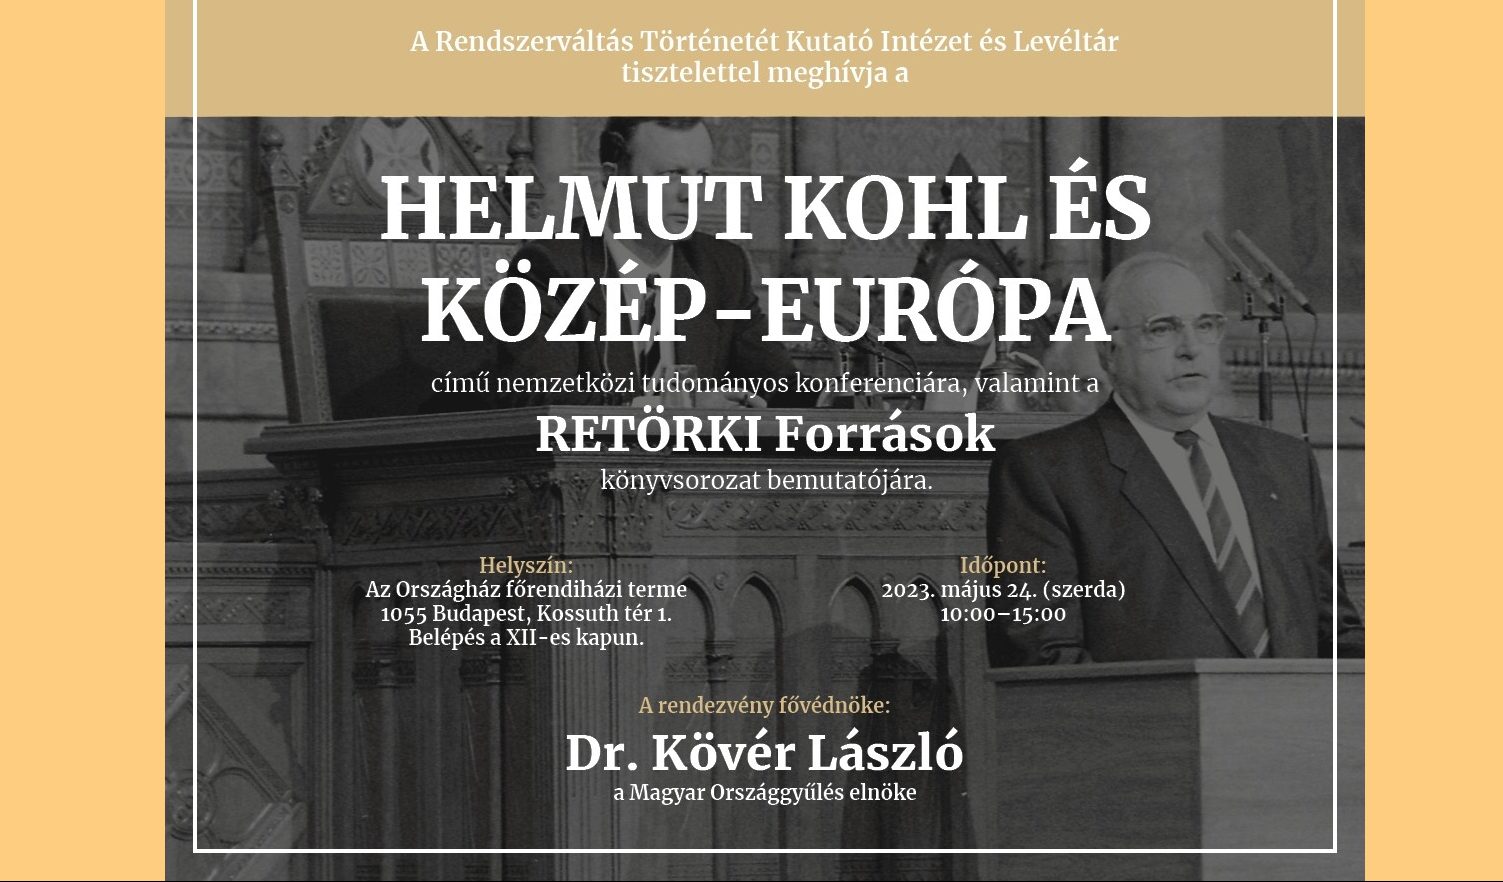 Helmut Kohl and Central Europe - International Conference